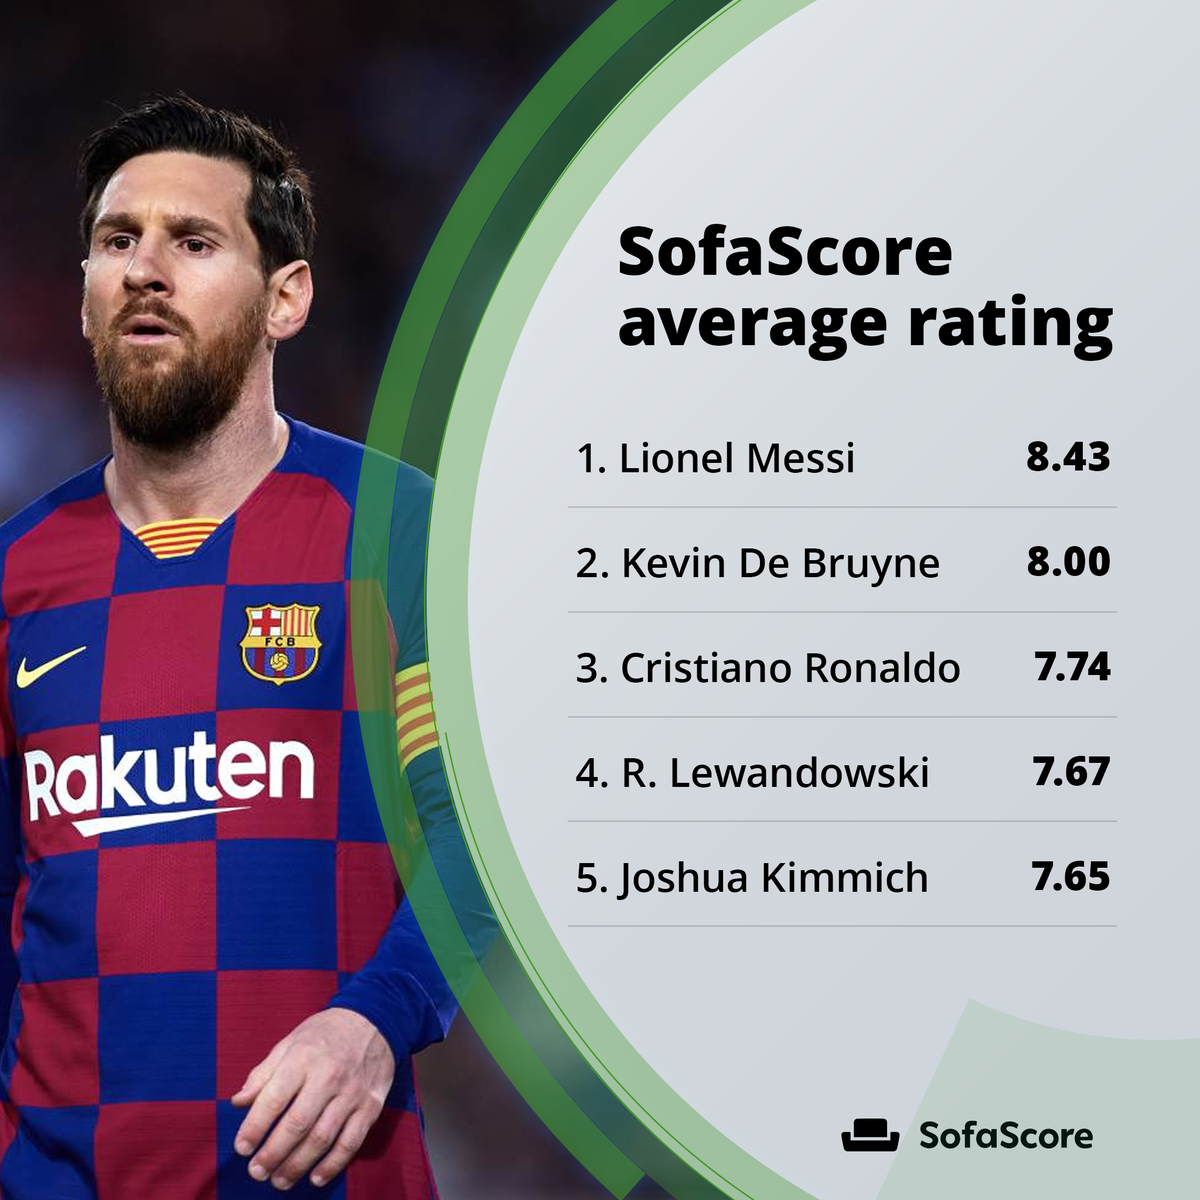  | Stat leaders - Top 5 leagues 2019/20Finally, top 5 European leagues finished their season after Serie A wrapped up this weekend, so it's time for a recap!Coming up first are our highest-rated players, with Lionel Messi topping the list with an 8.43 average rating! 